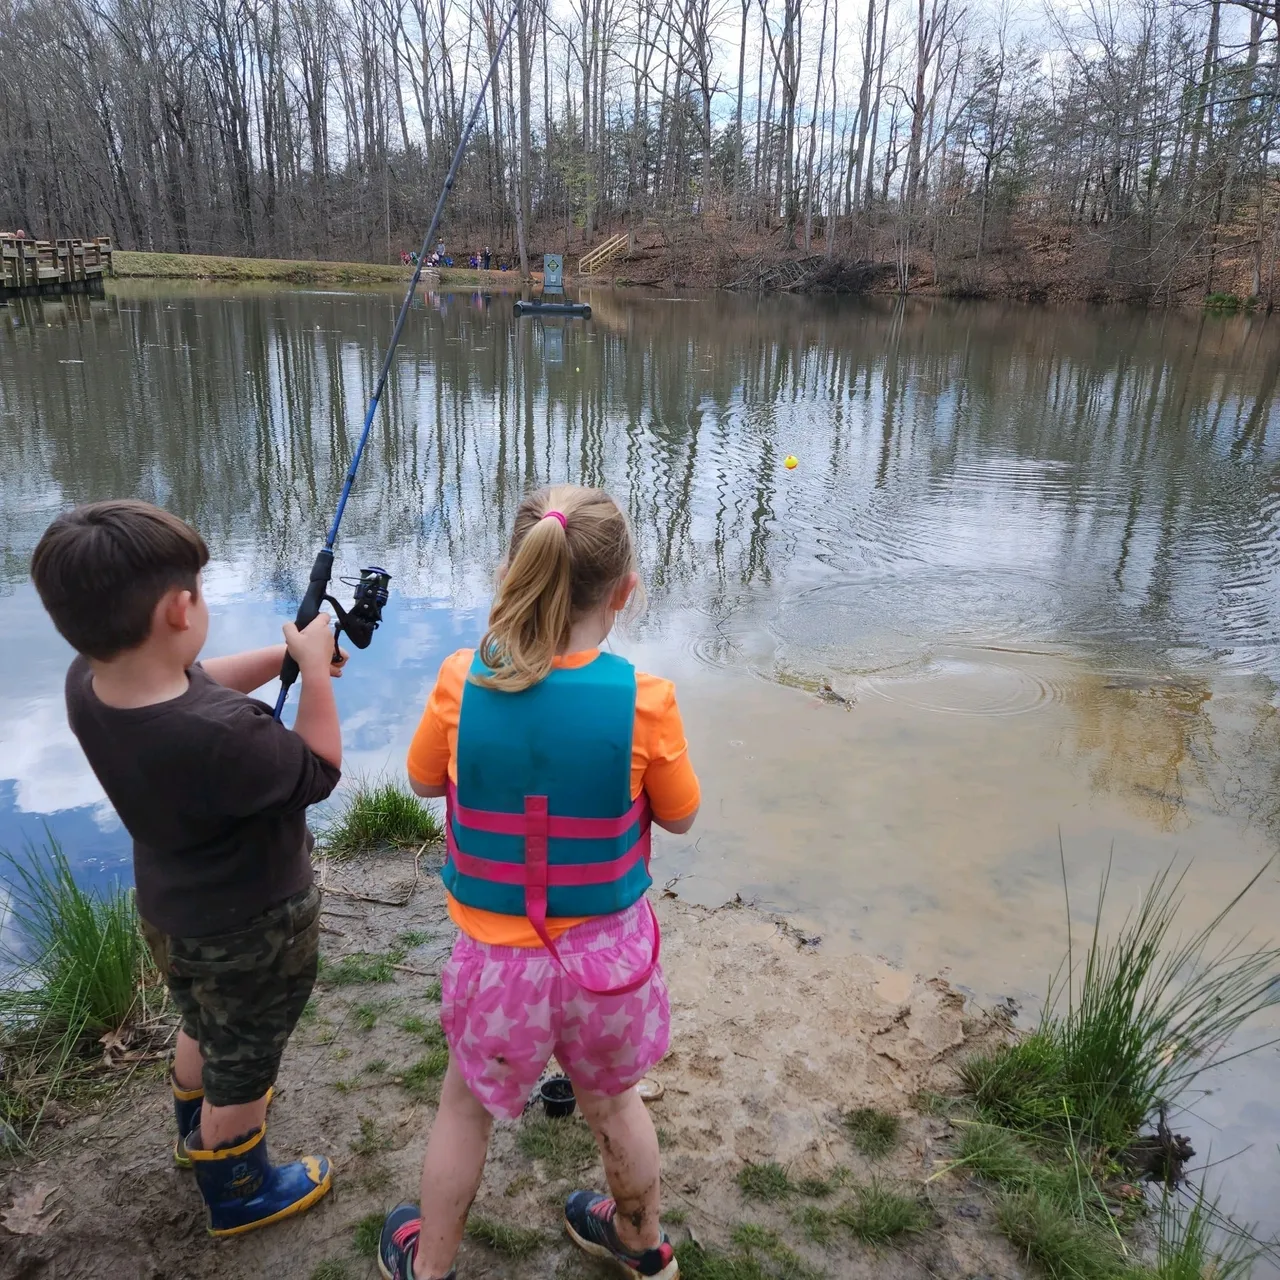 Two children fishing in a pond on a cloudy day.